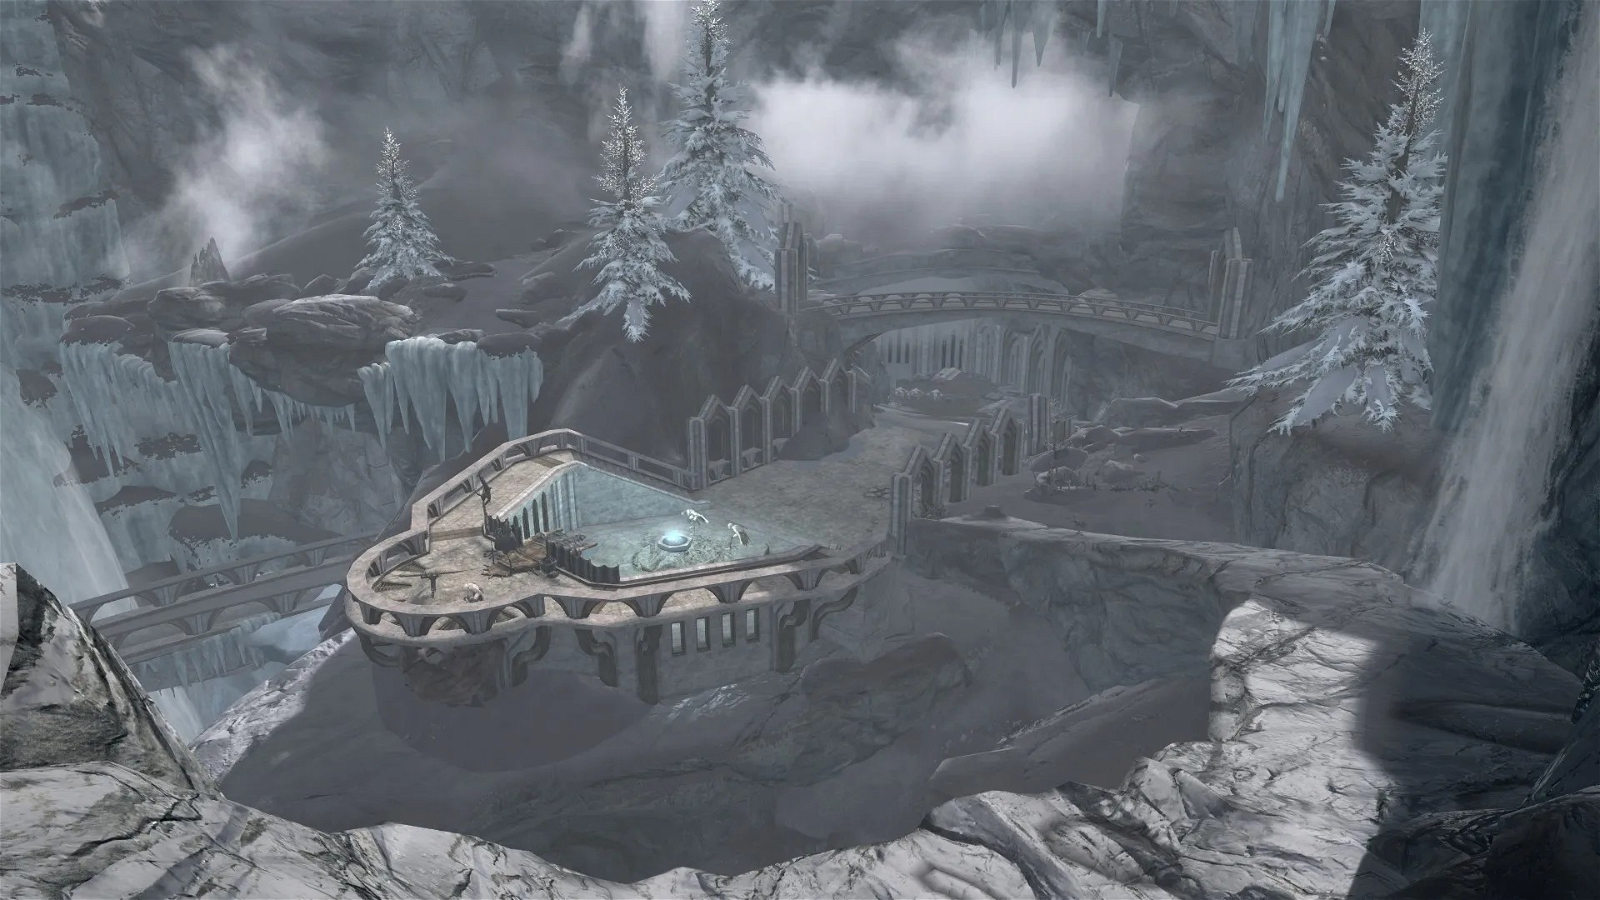 The feature is called The Initiate's Rest, a player rest stop in the mod. It is a nod to the restorative hubs found in Miyazaki's masterpieces, such as Firelink Shrine in Dark Souls and Roundtable Hold in Elden Ring.